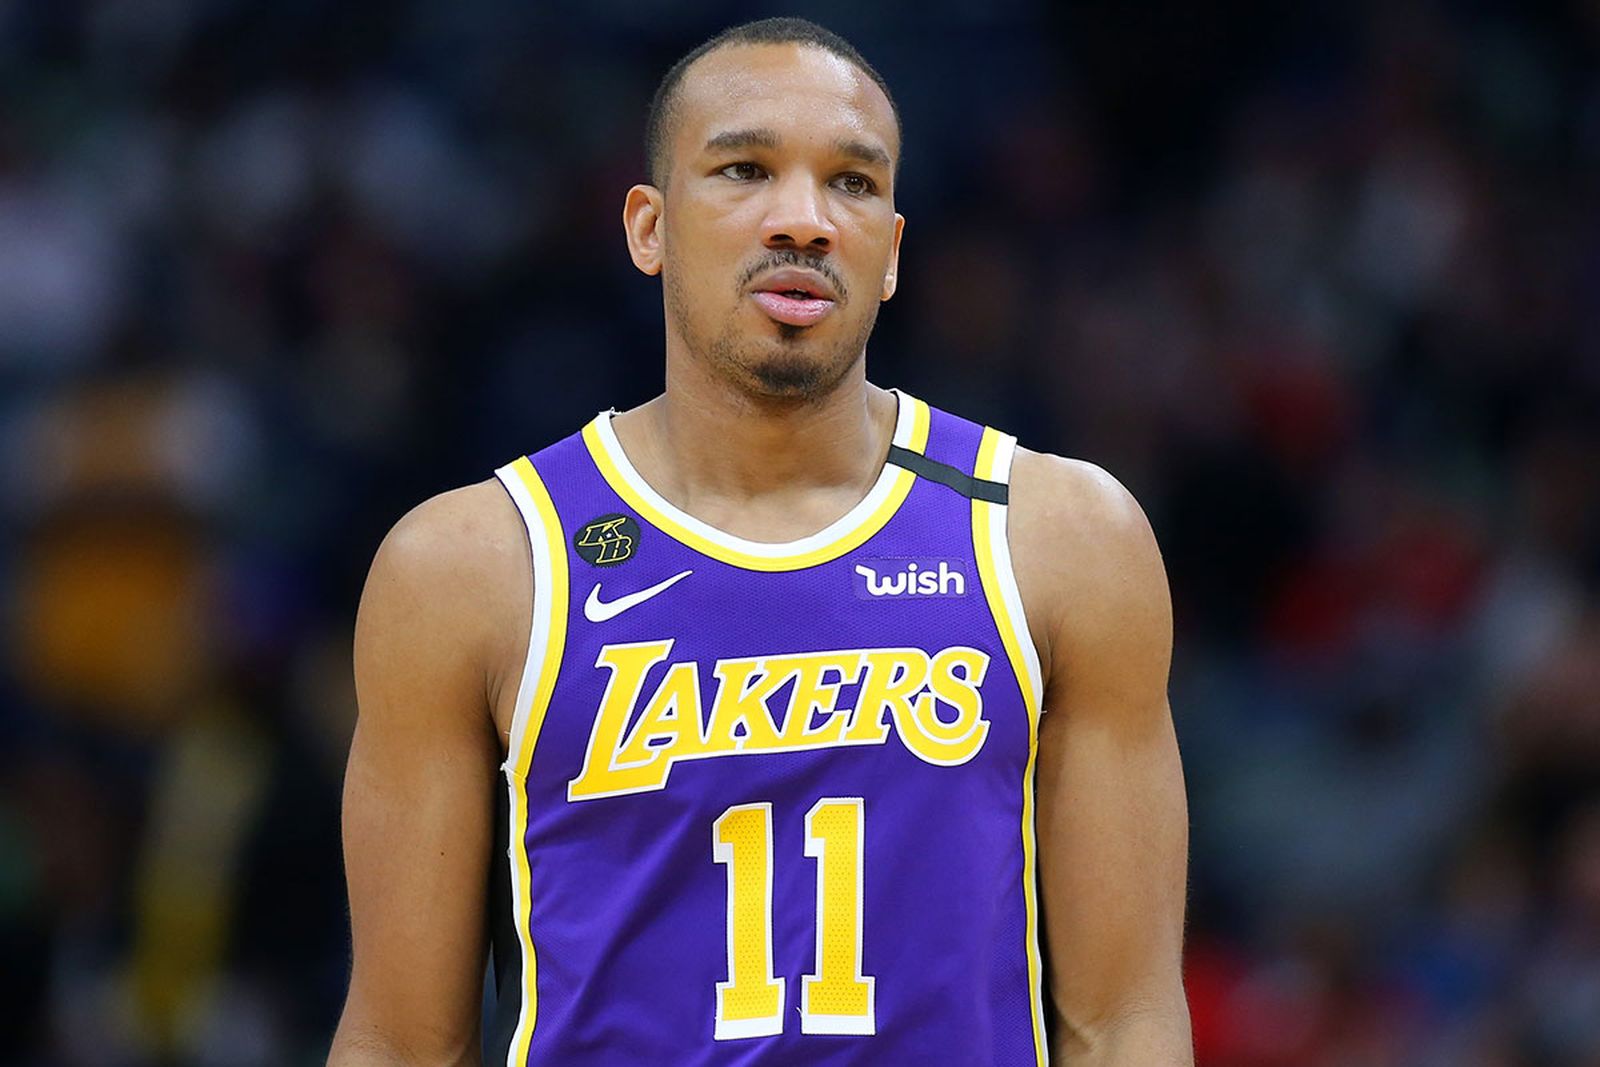 Avery Bradley #11 of the Los Angeles Lakers reacts against the New Orleans Pelicans during the second half at the Smoothie King Center